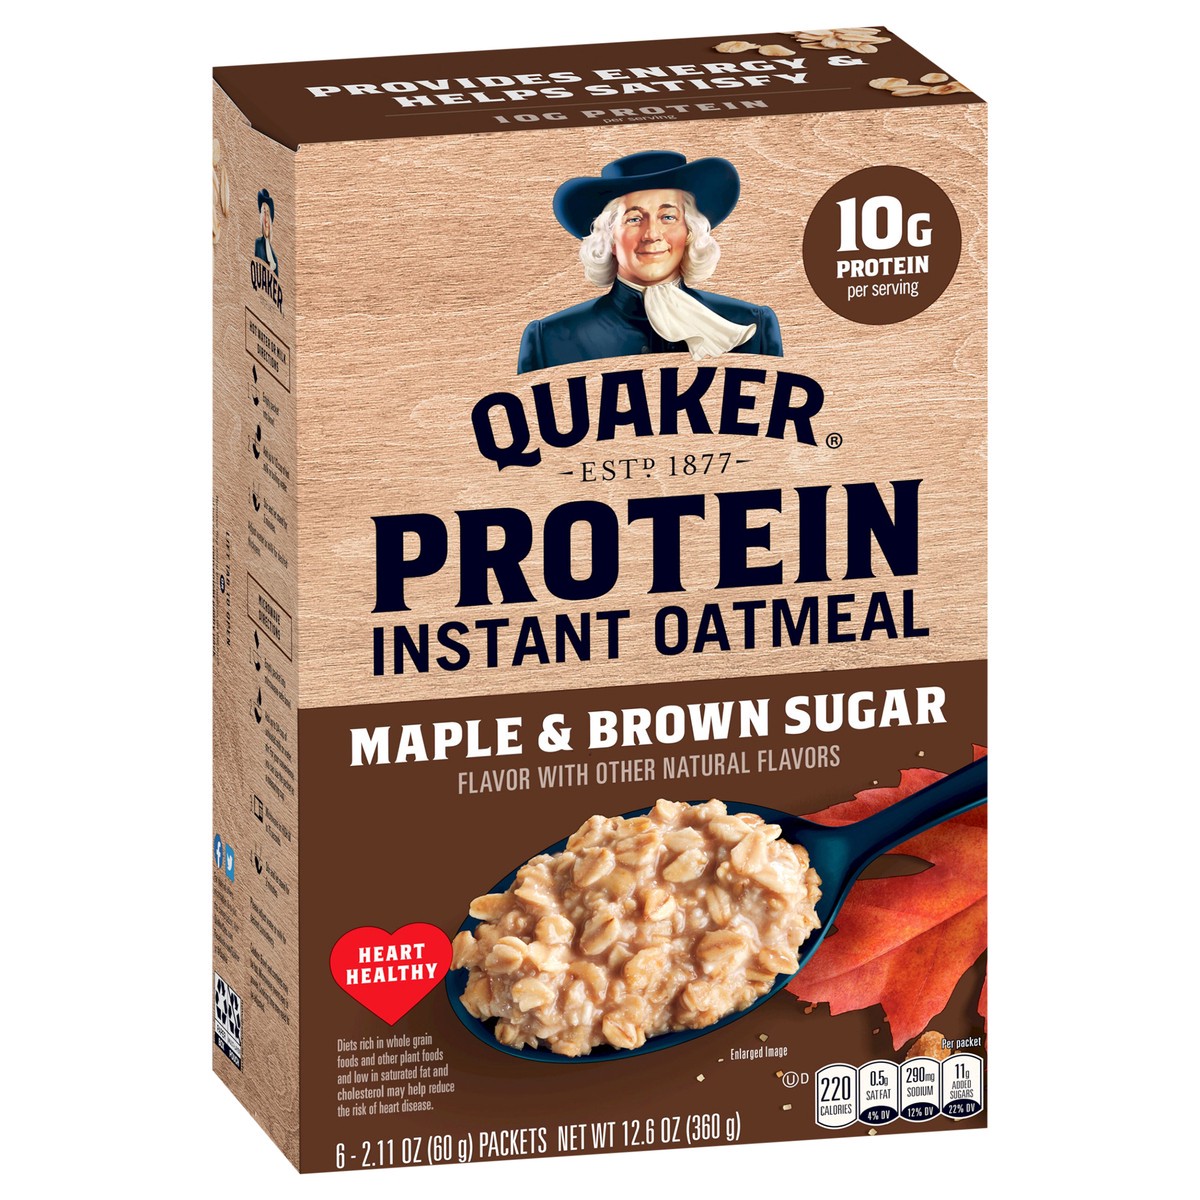 slide 2 of 6, Quaker Instant Oatmeal Protein Maple & Brown Sugar 2.11 Oz 6 Count, 12.6 oz